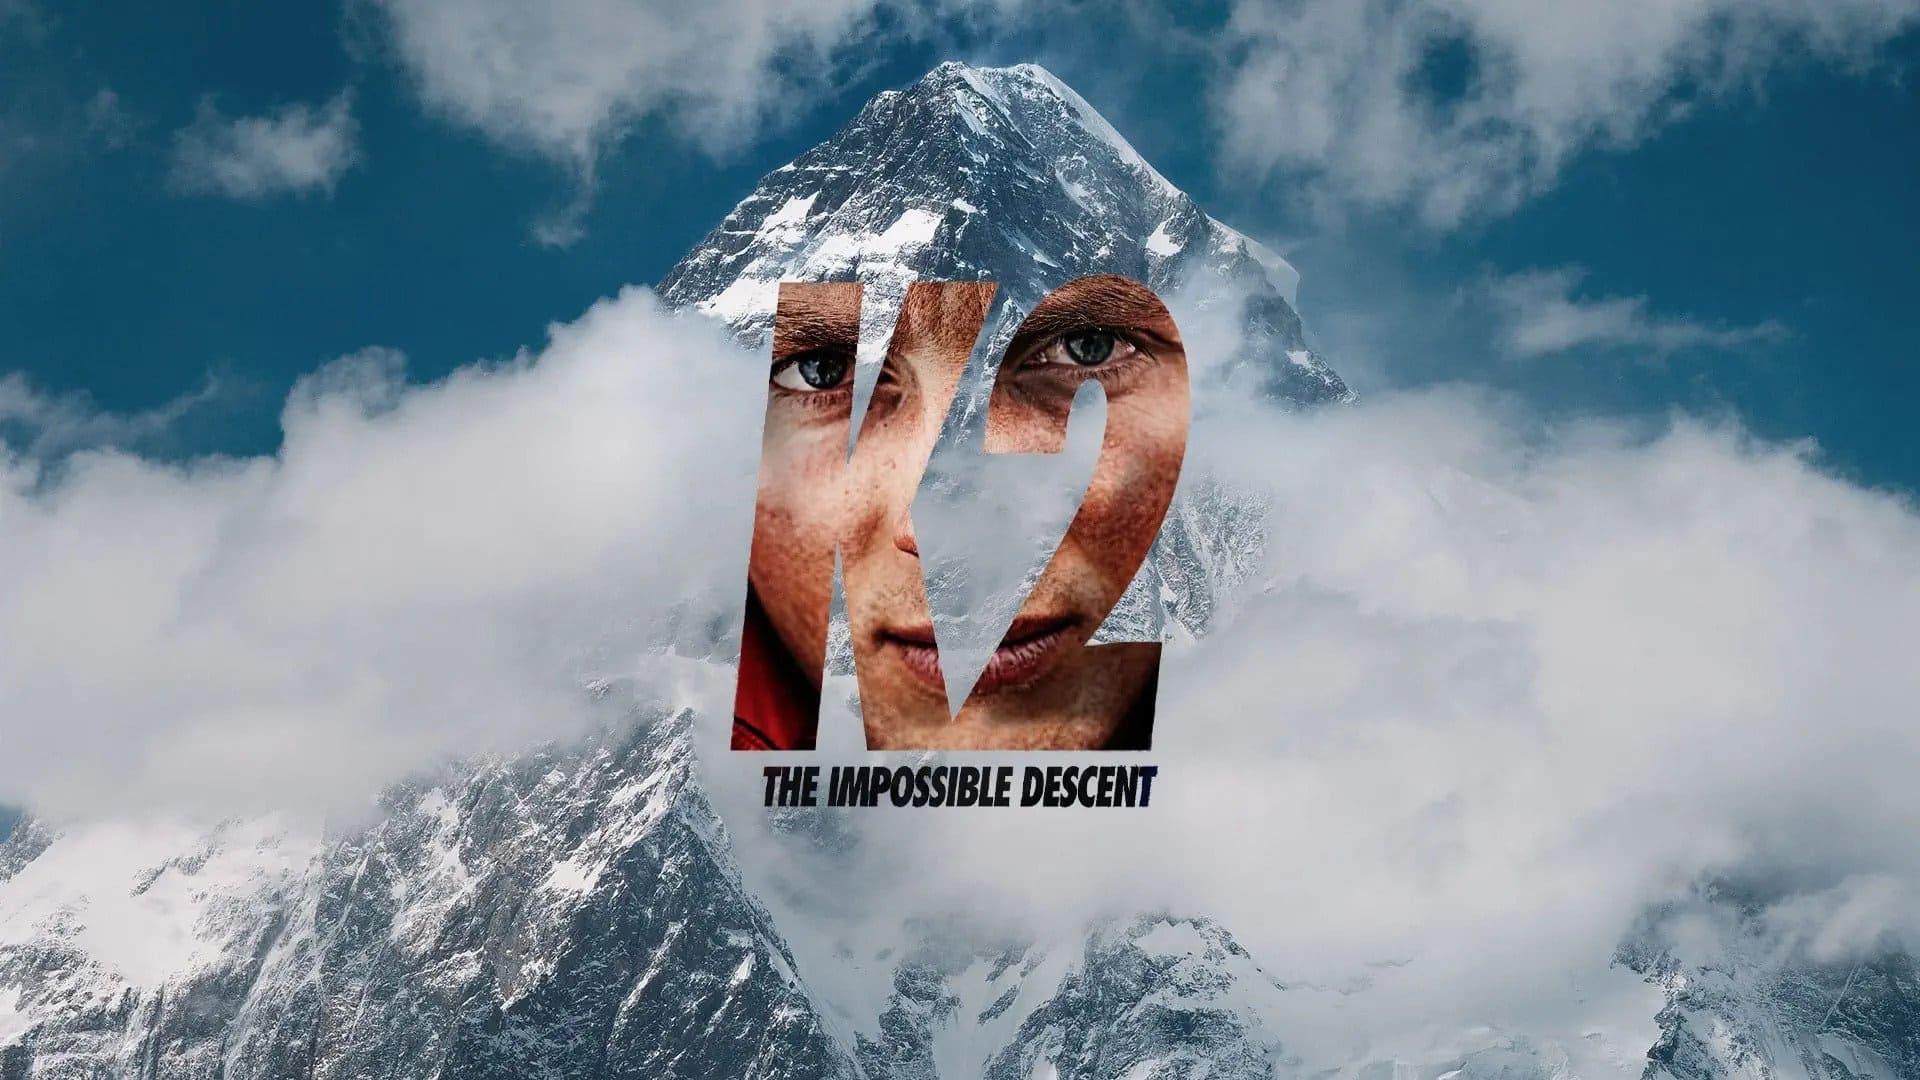 K2: The Impossible Descent backdrop